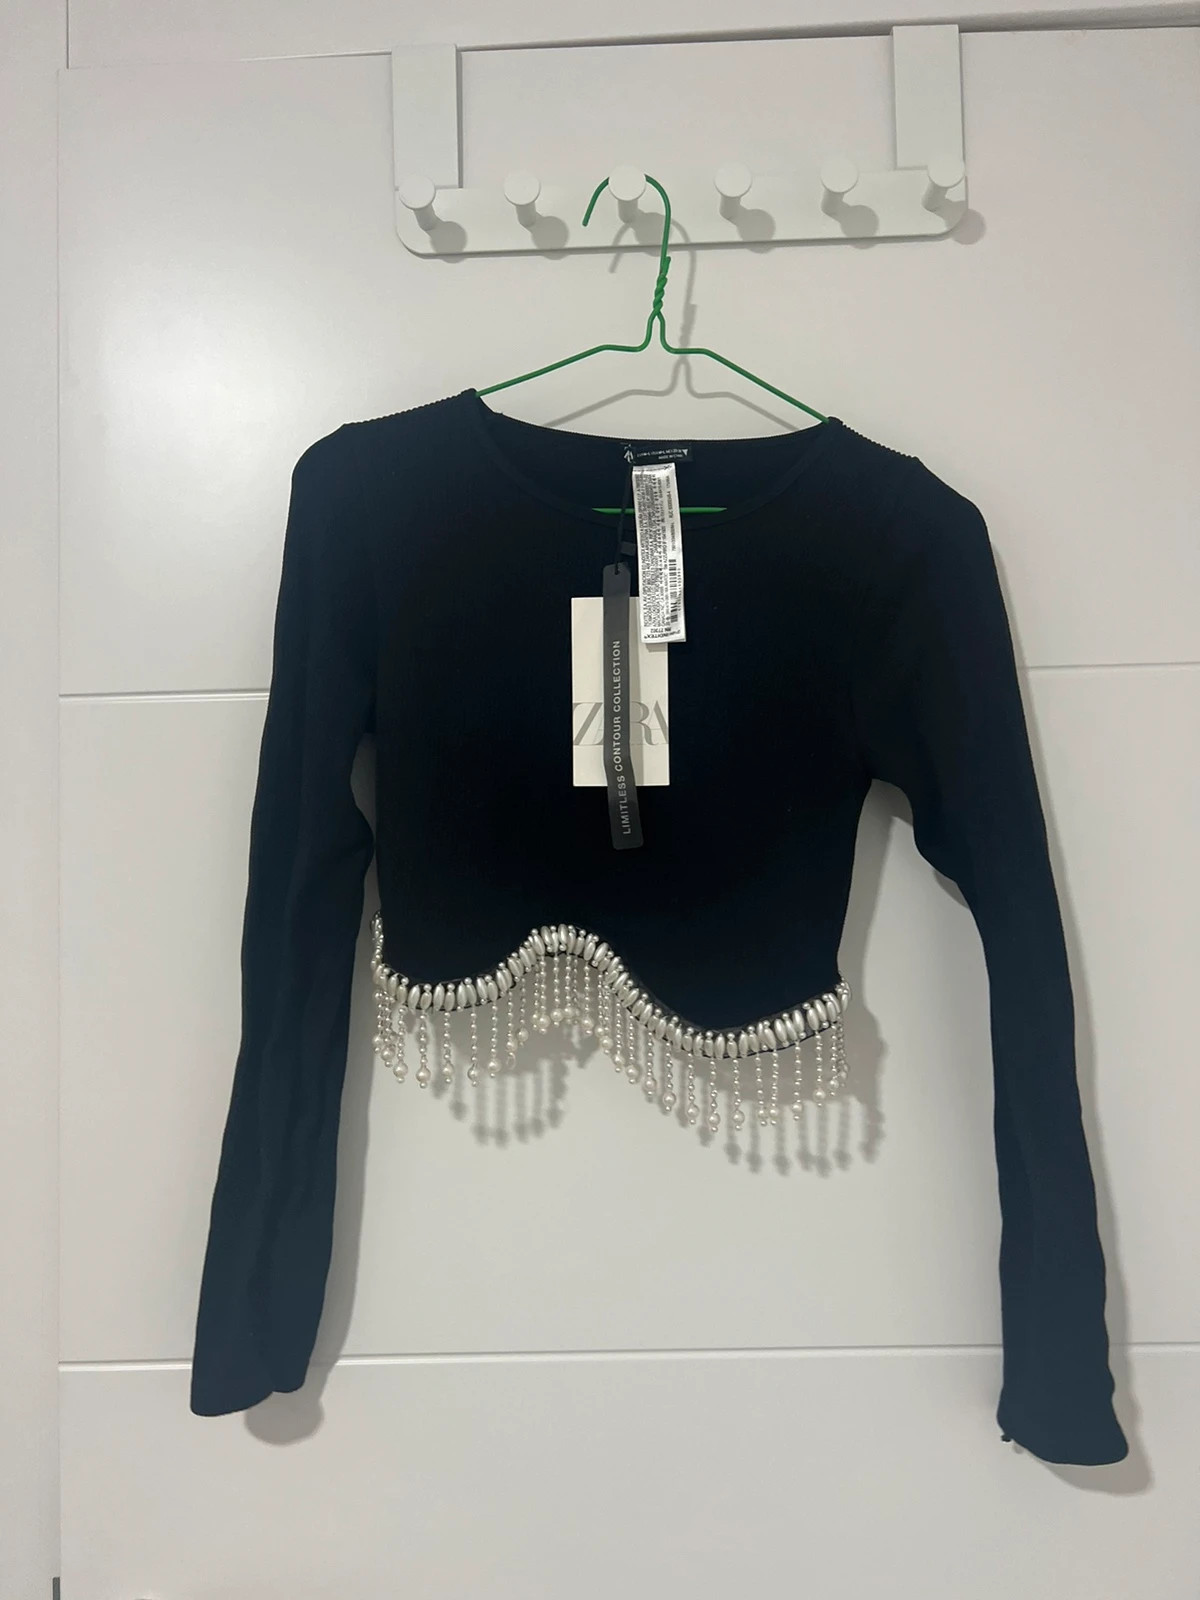 NWT Zara Black Long Sleeve Crop Top Limitless Contour Collection Size XS/S